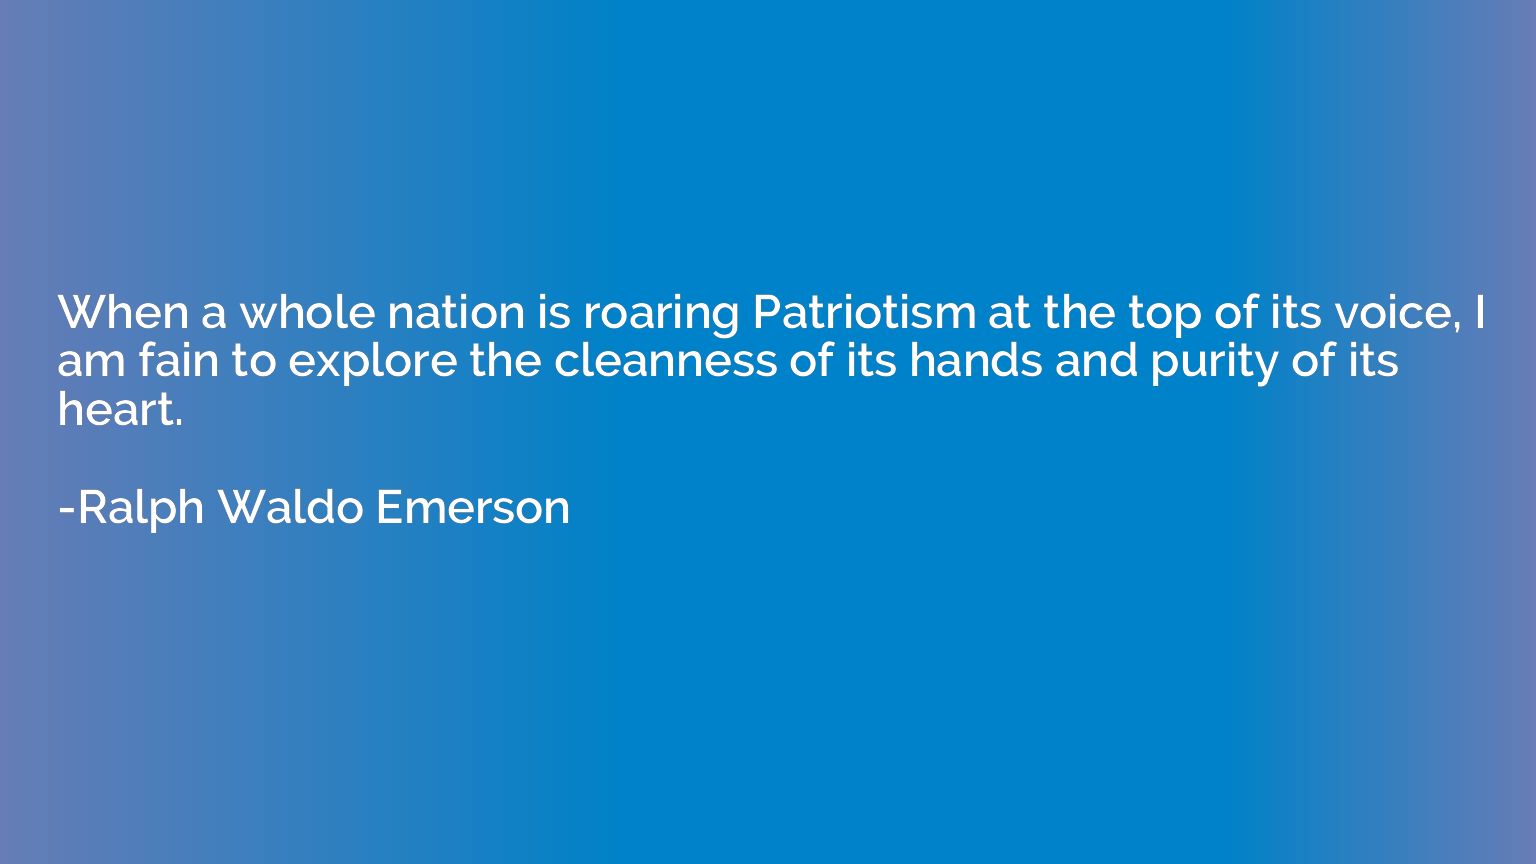 When a whole nation is roaring Patriotism at the top of its 